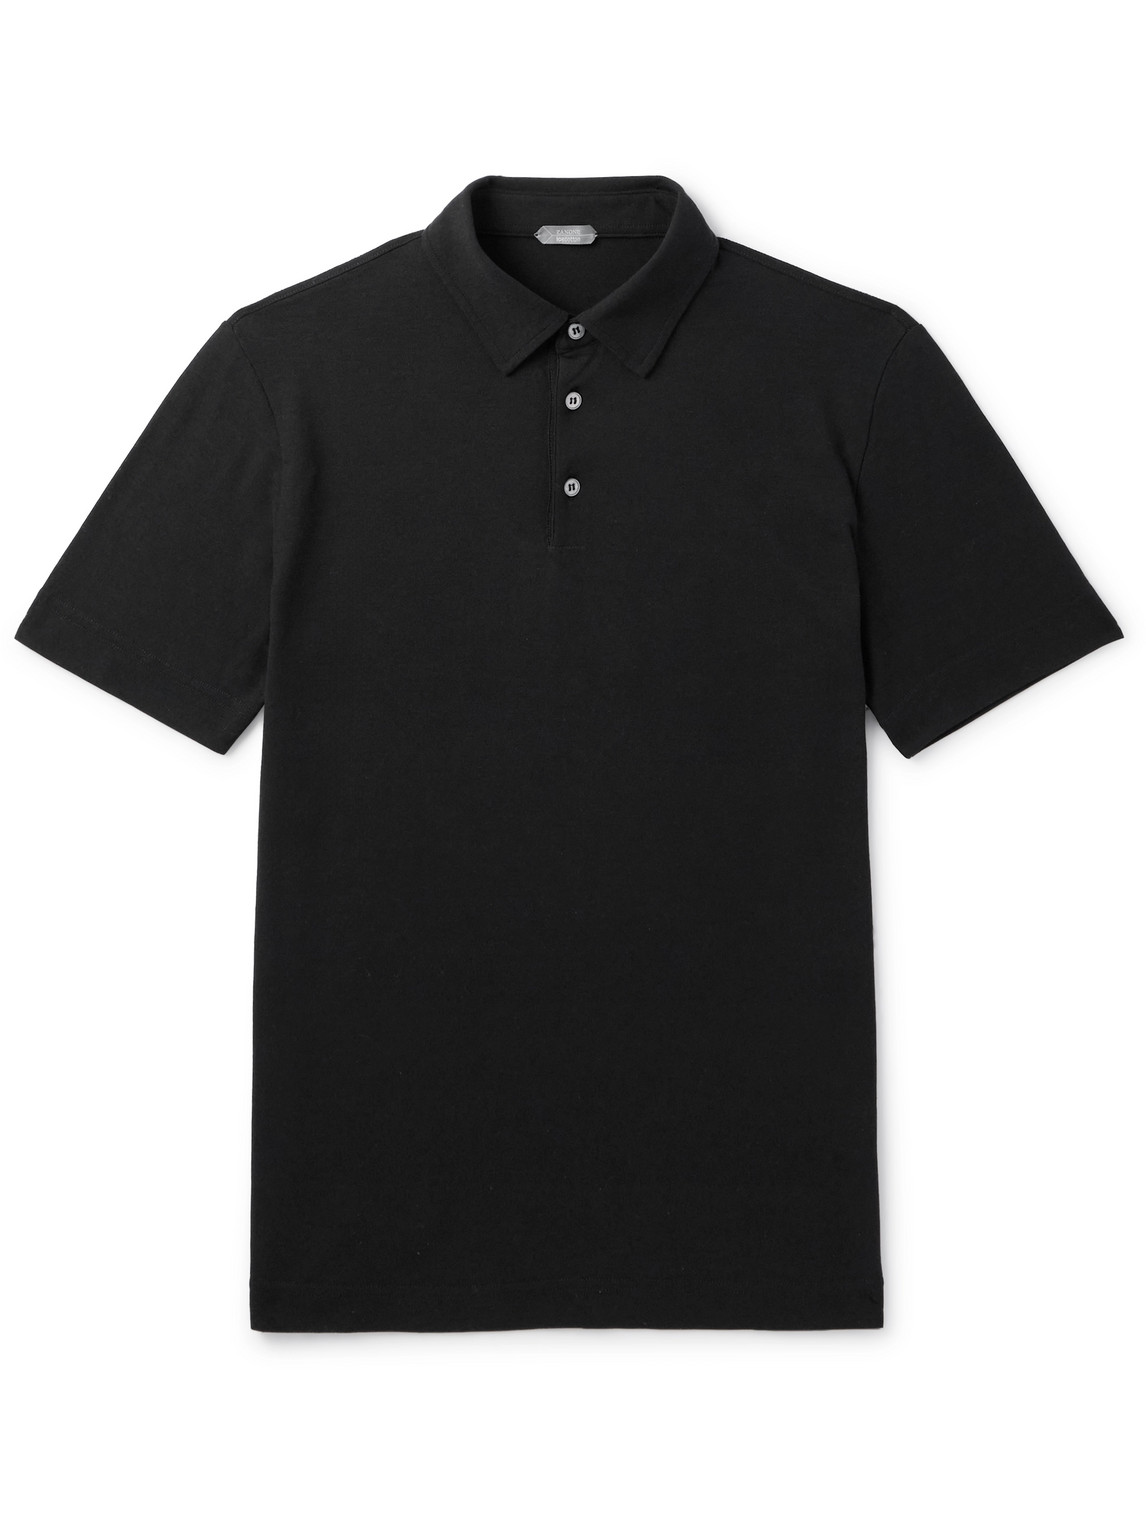 Incotex Slim-fit Icecotton-jersey Polo Shirt In Black